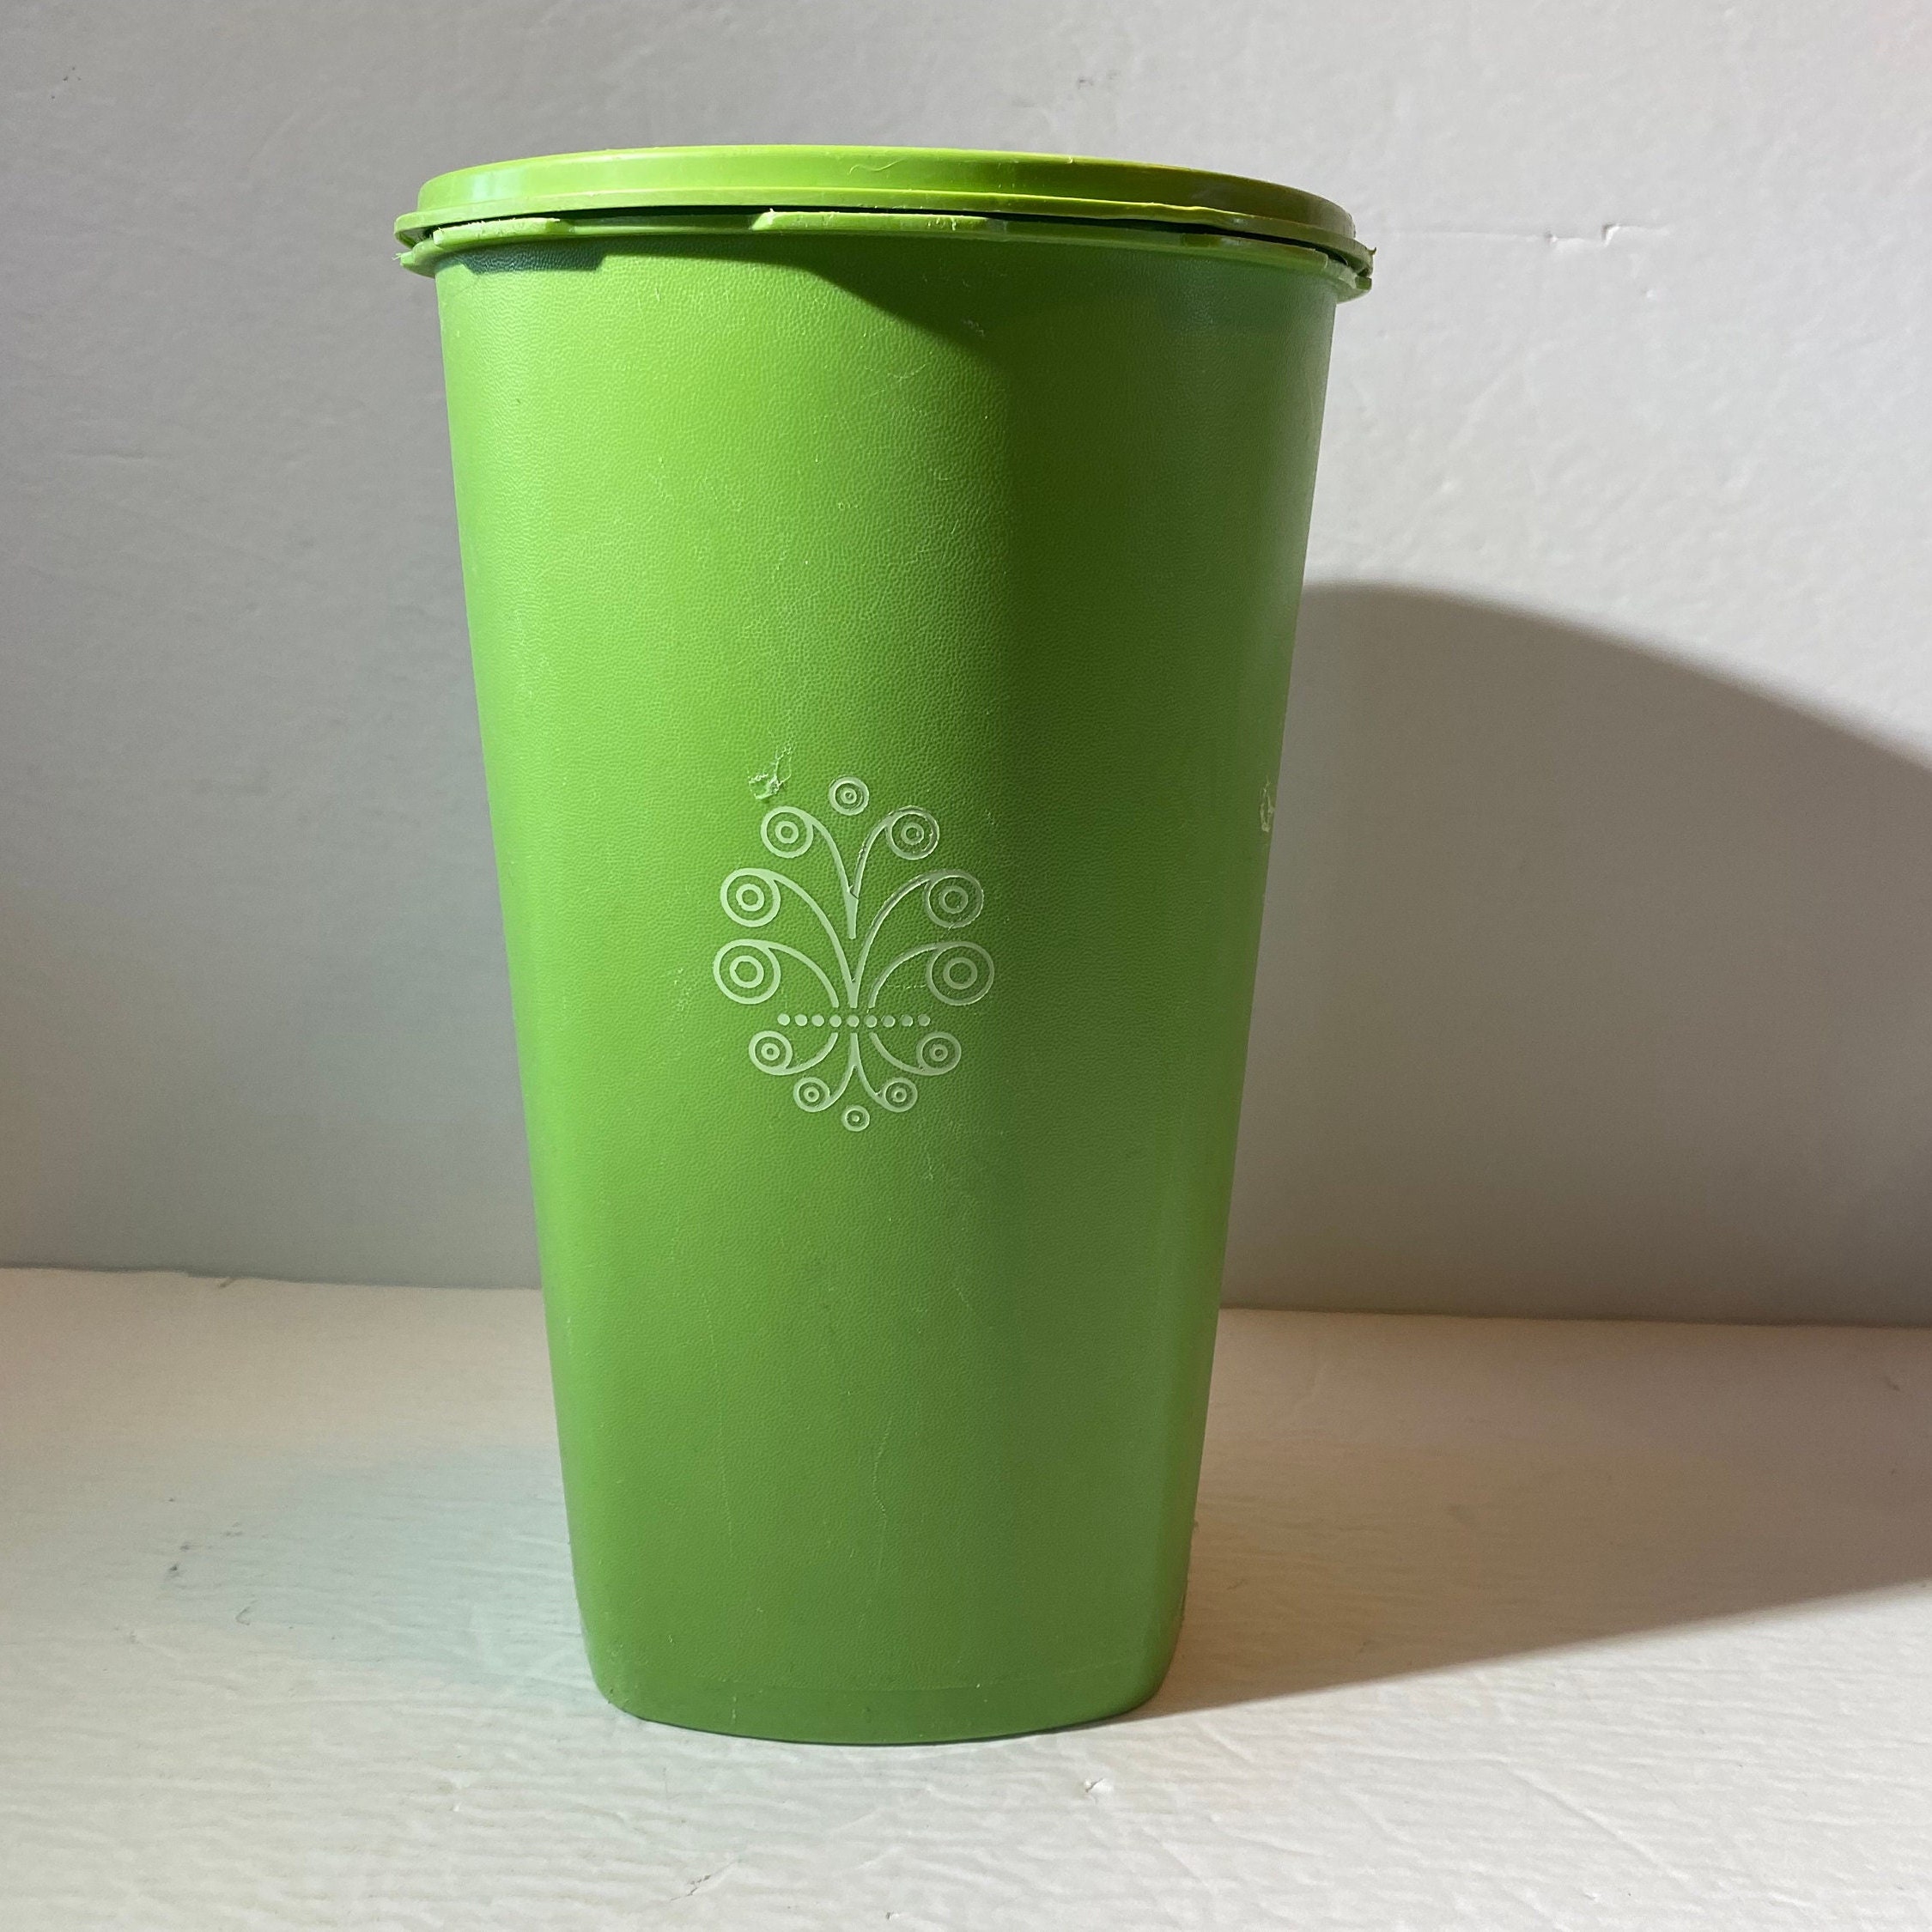 Vintage Green Servalier Tupperware Canister 1298-15 with Lid 810-5